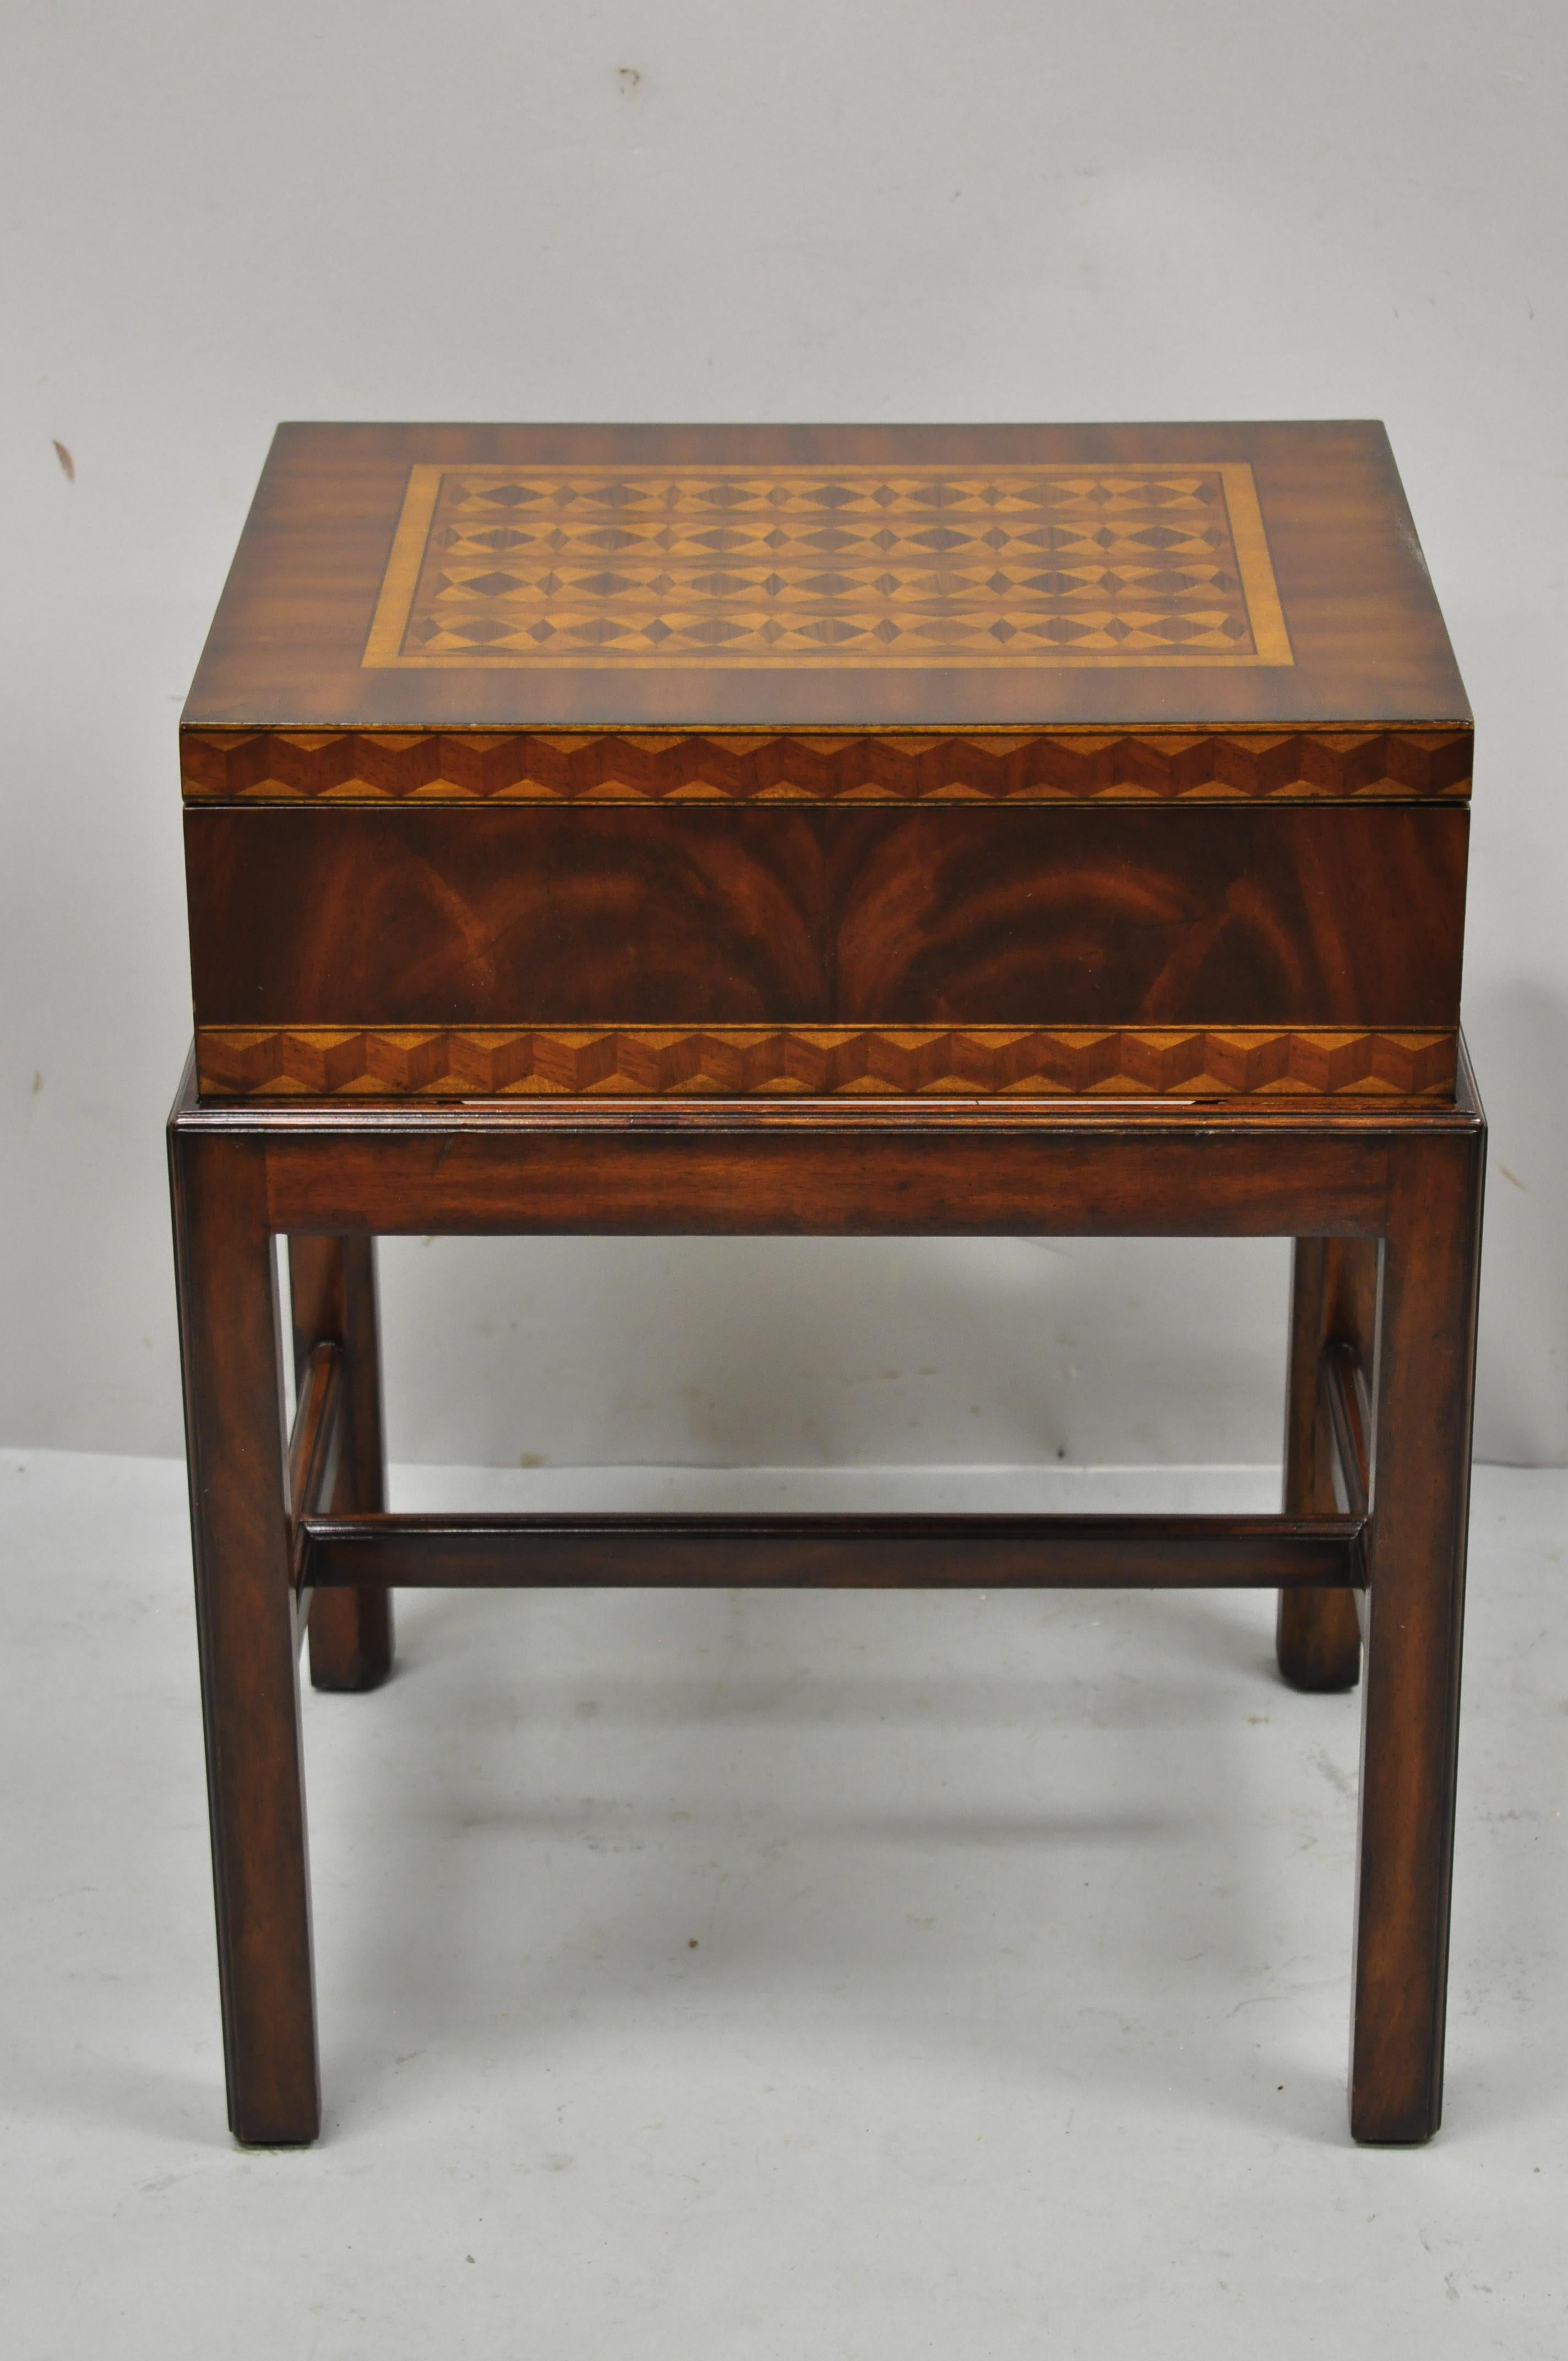 Maitland Smith marquetry inlay campaign style trunk chest side table on base. Item features marquetry inlay throughout, solid brass hardware, stretcher base, solid wood construction, beautiful wood grain, original label, quality craftsmanship, great